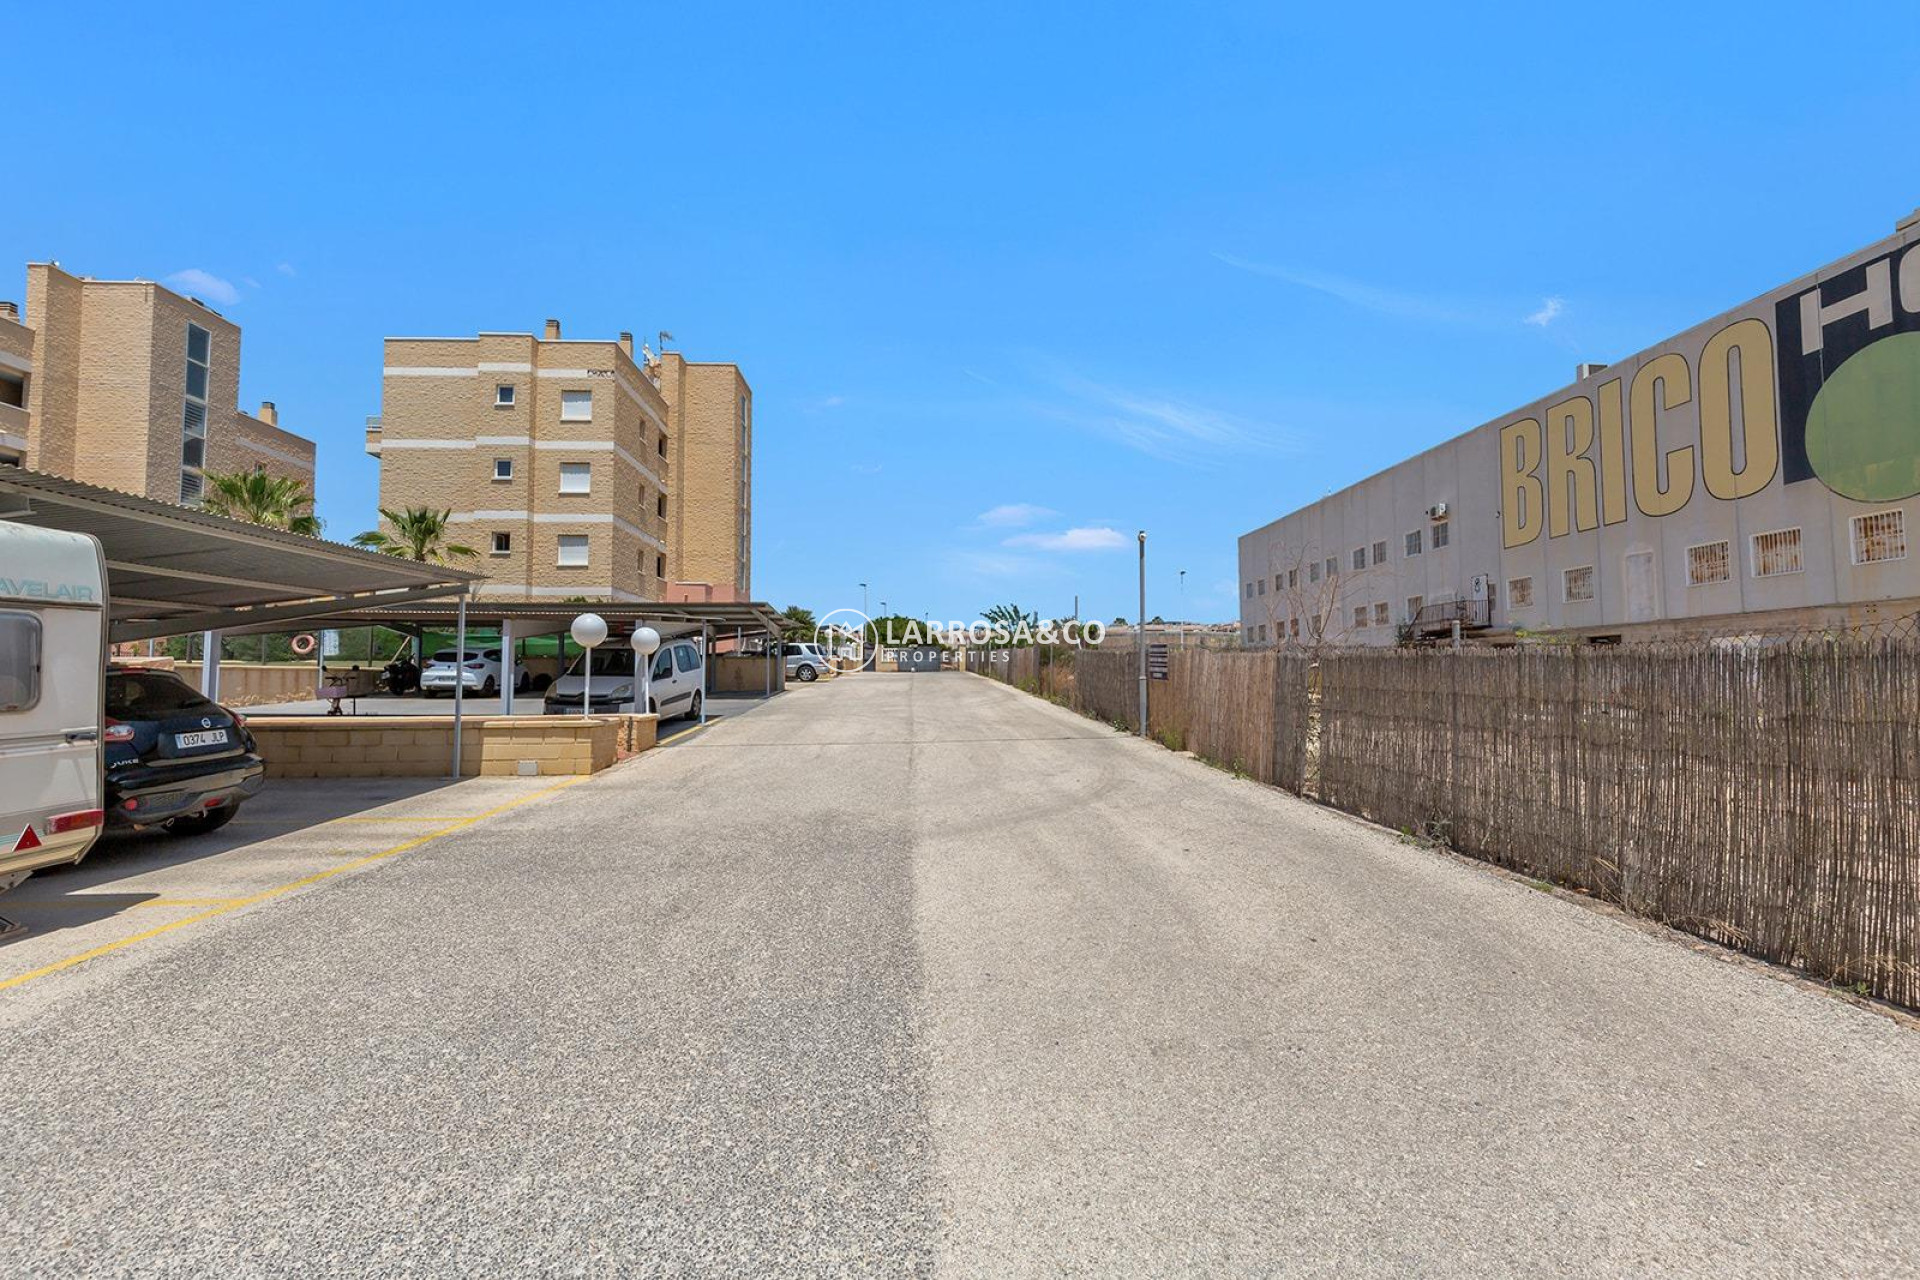 A Vendre - Apartment - Torrevieja - Sector 25